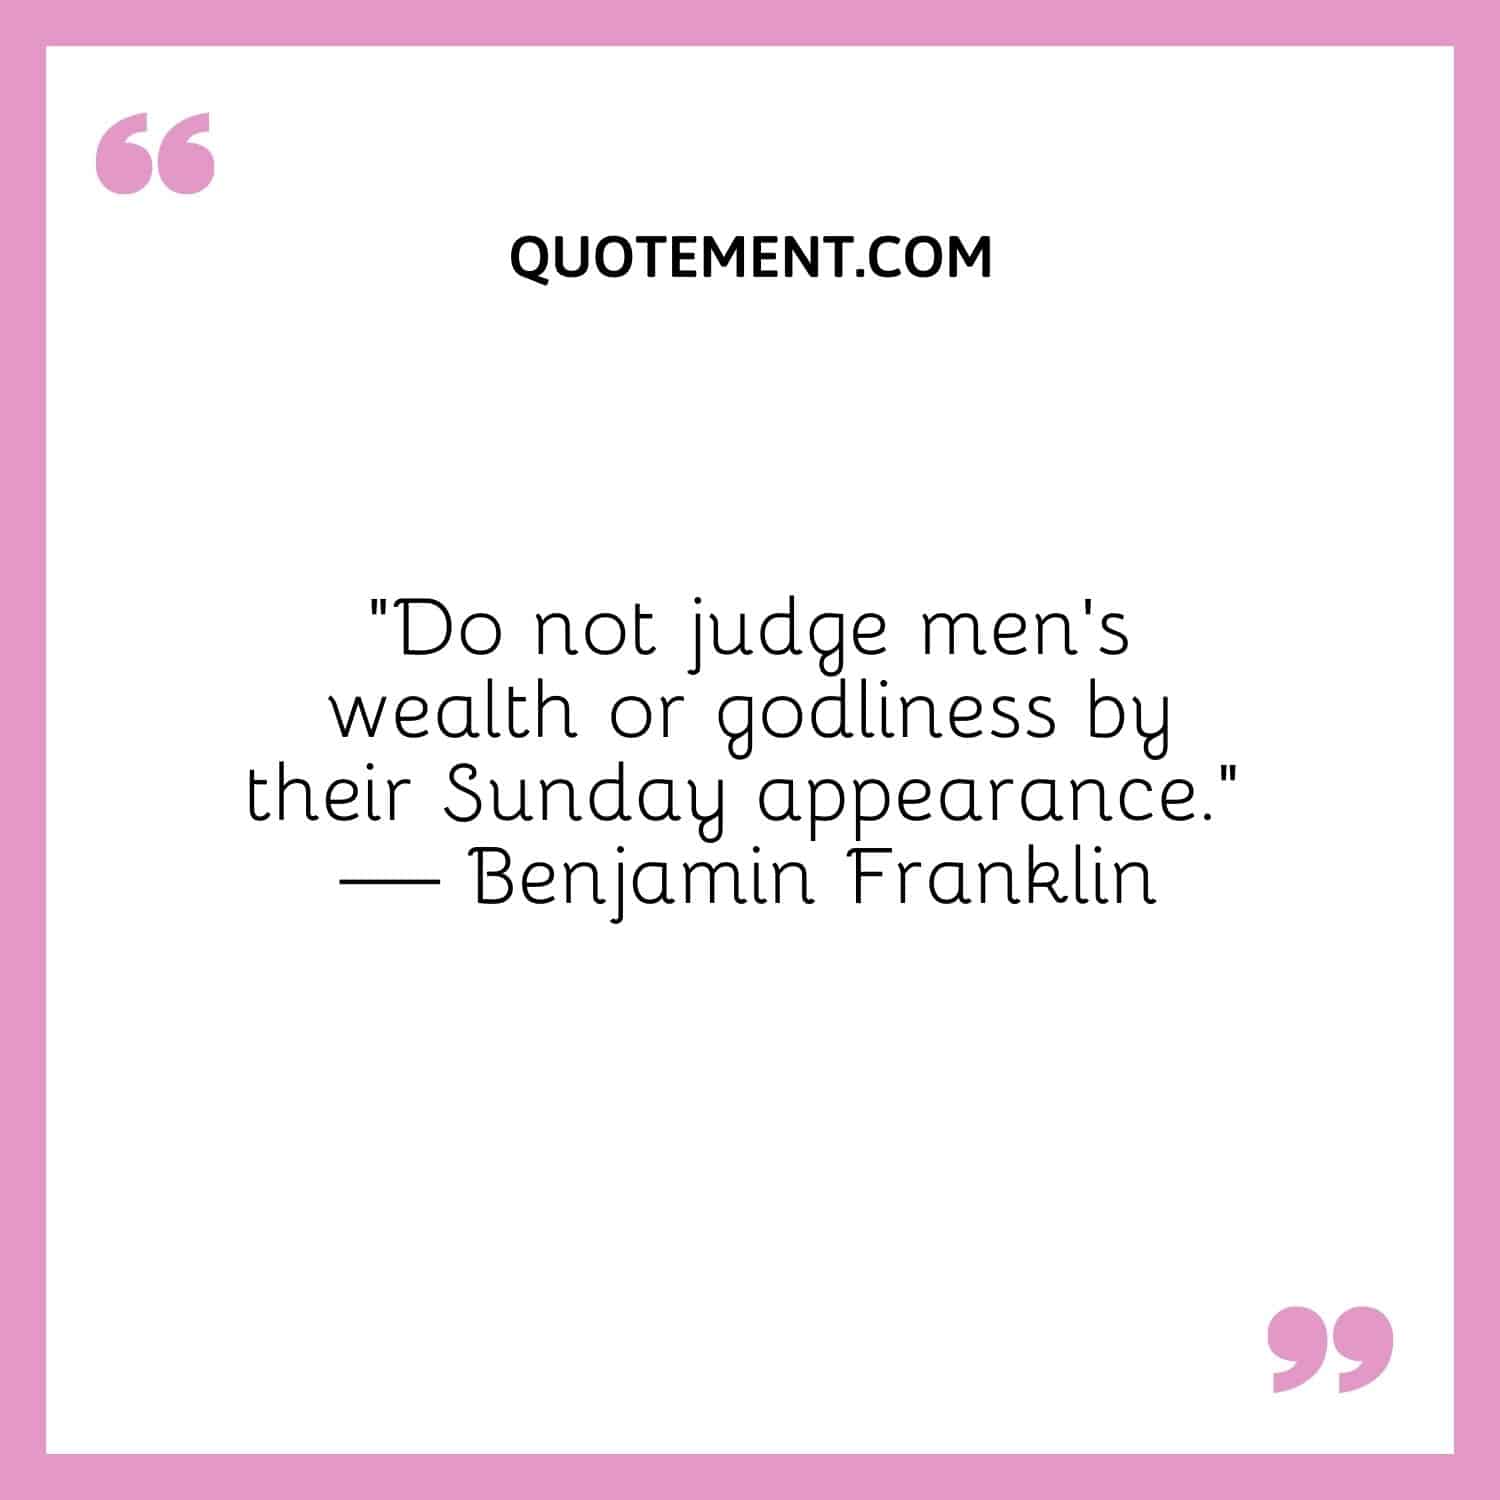 Do not judge men’s wealth or godliness by their Sunday appearance